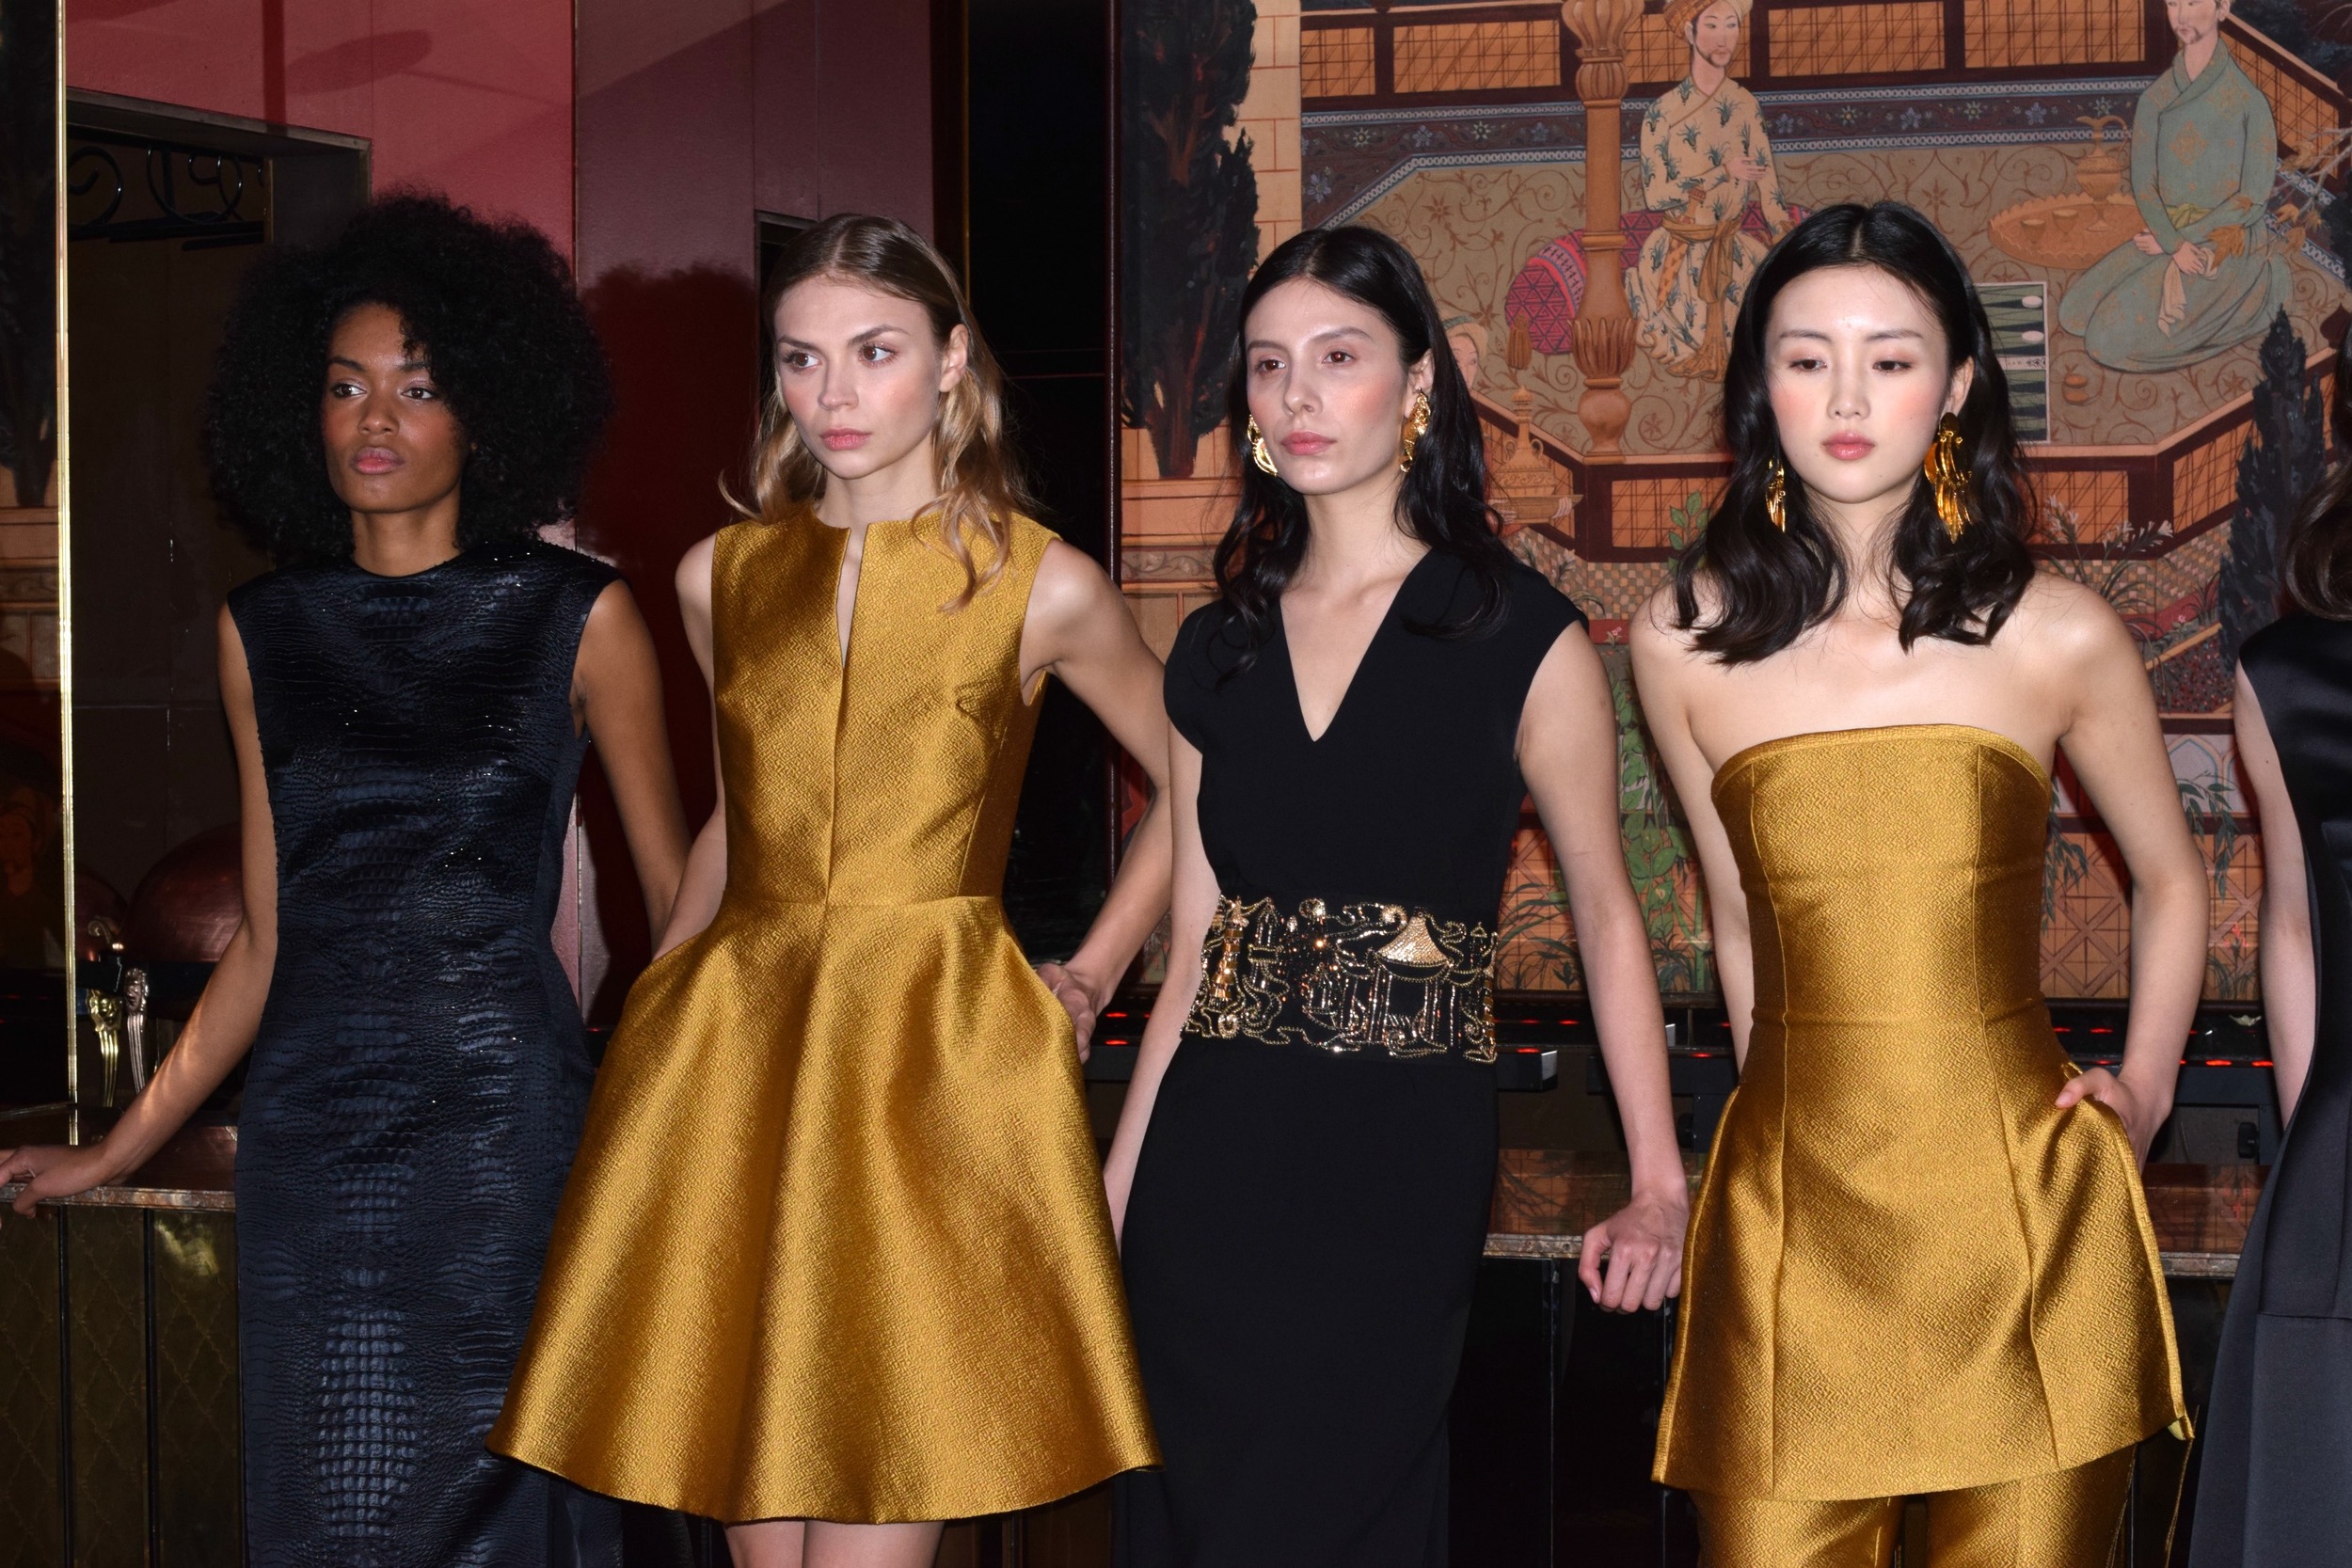 All the Looks from the Valentino Fall 2016 Couture Collection